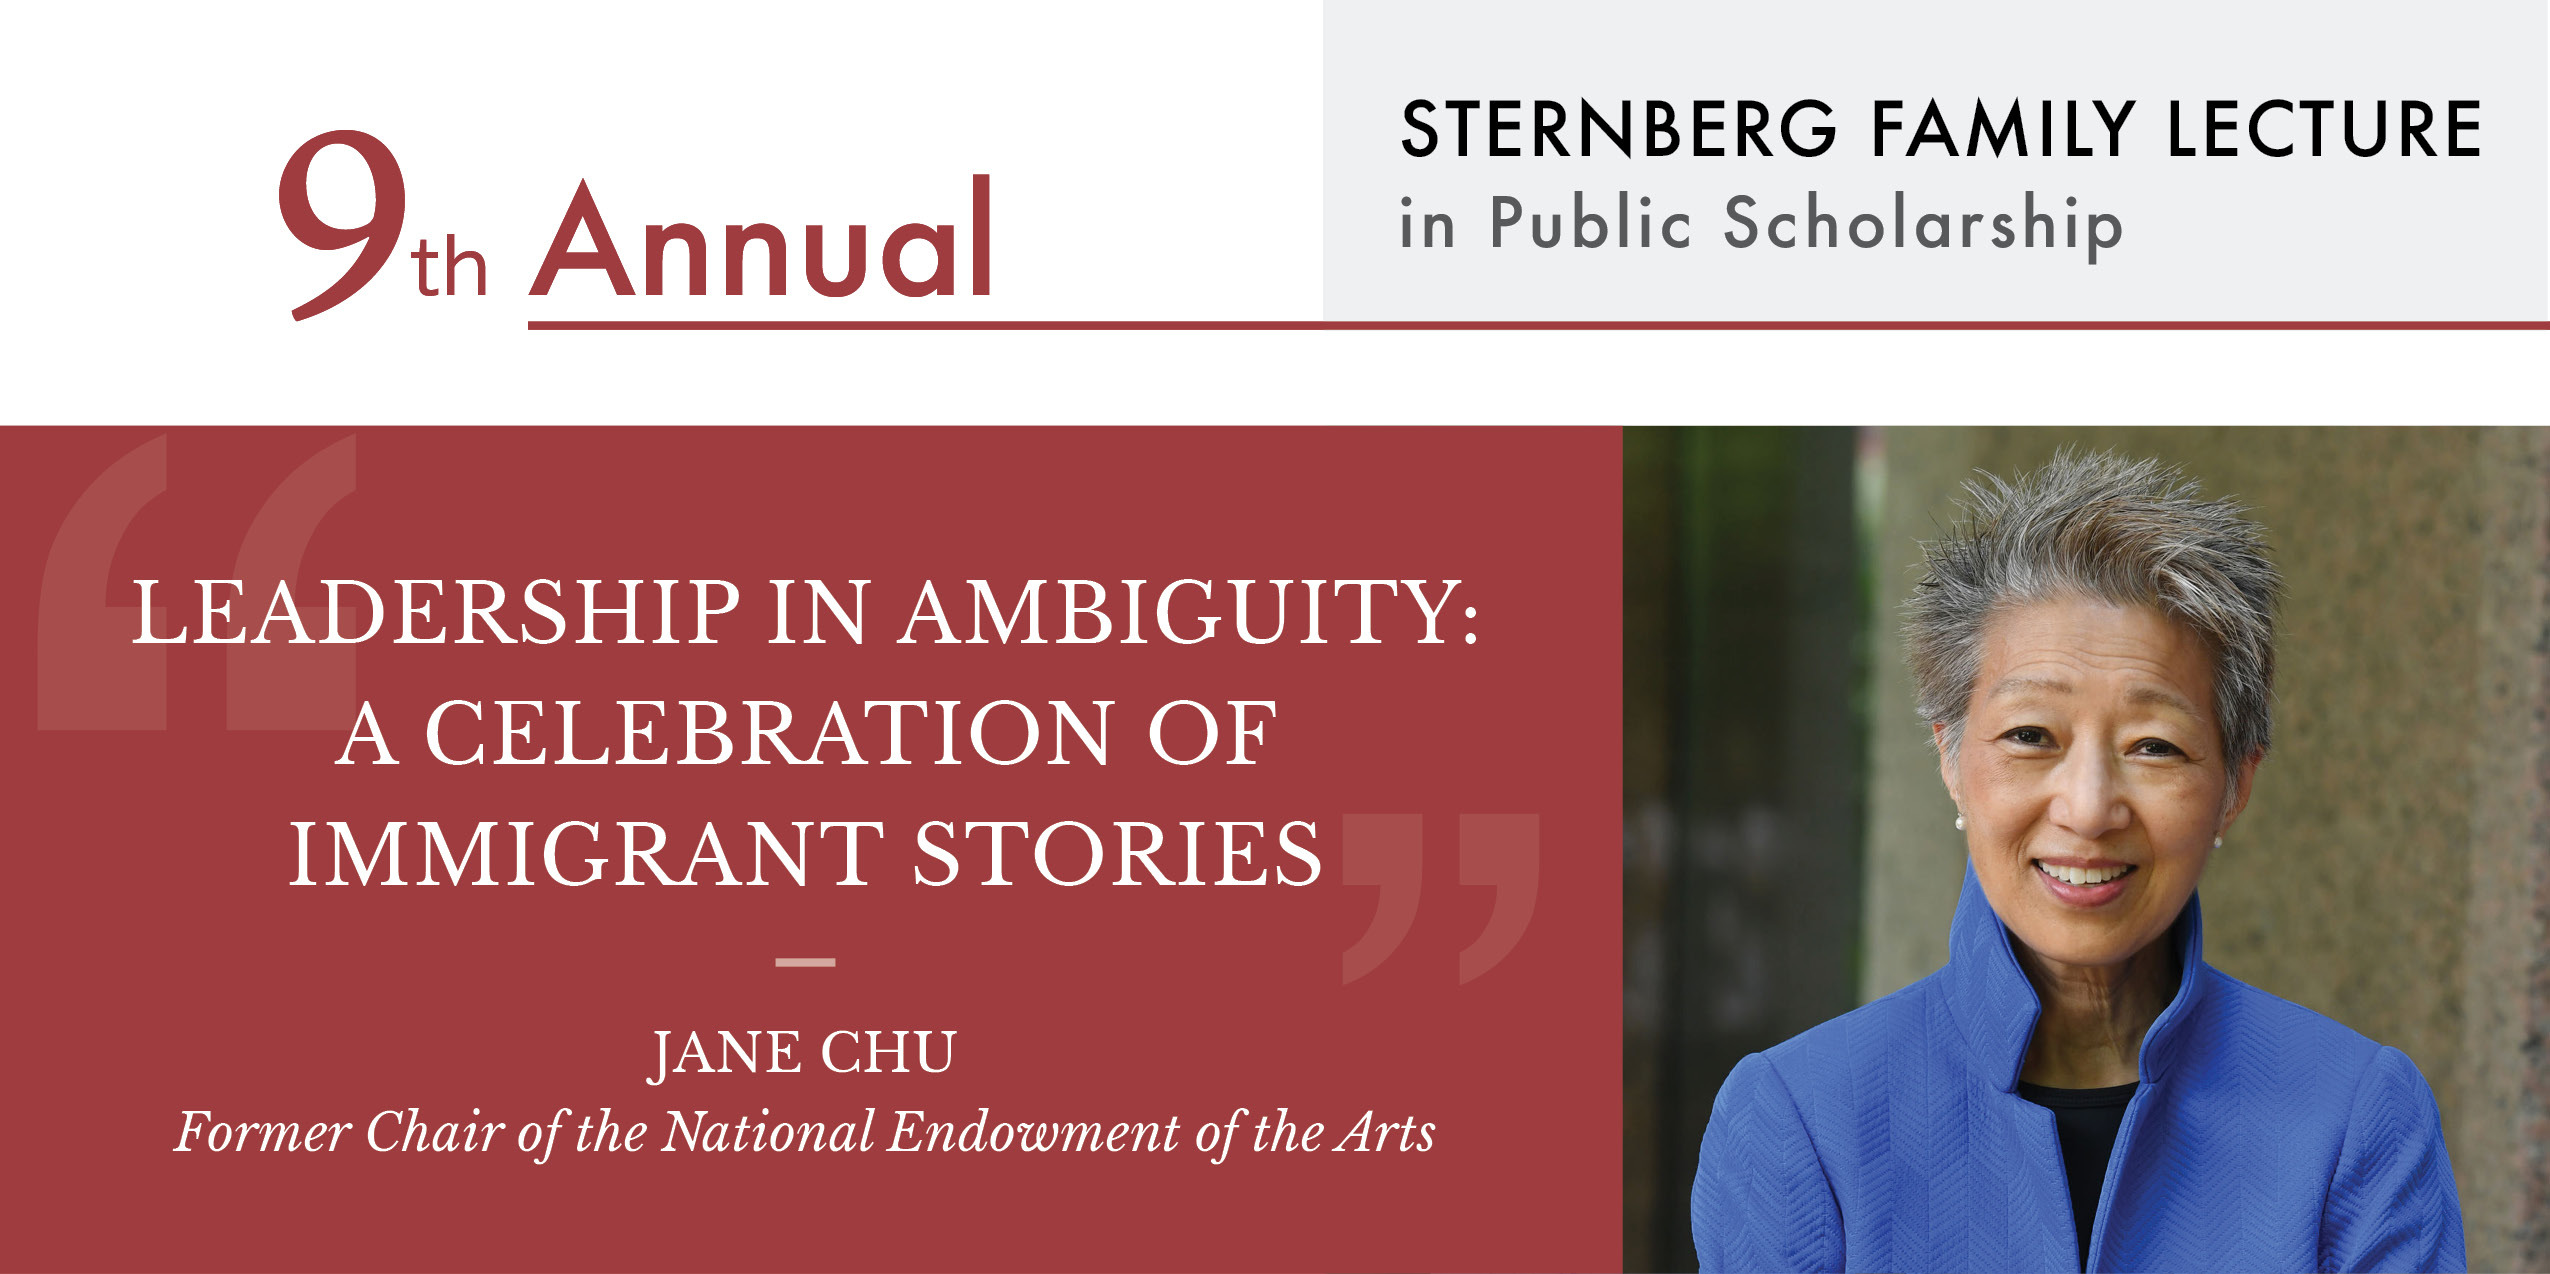 9th Sternberg Family Lecture in Public Scholarship. Leadership in Ambiguity: A Celebration of Immigrant Stories. Jane Chu, Former Chair of the National Endowment of the Arts